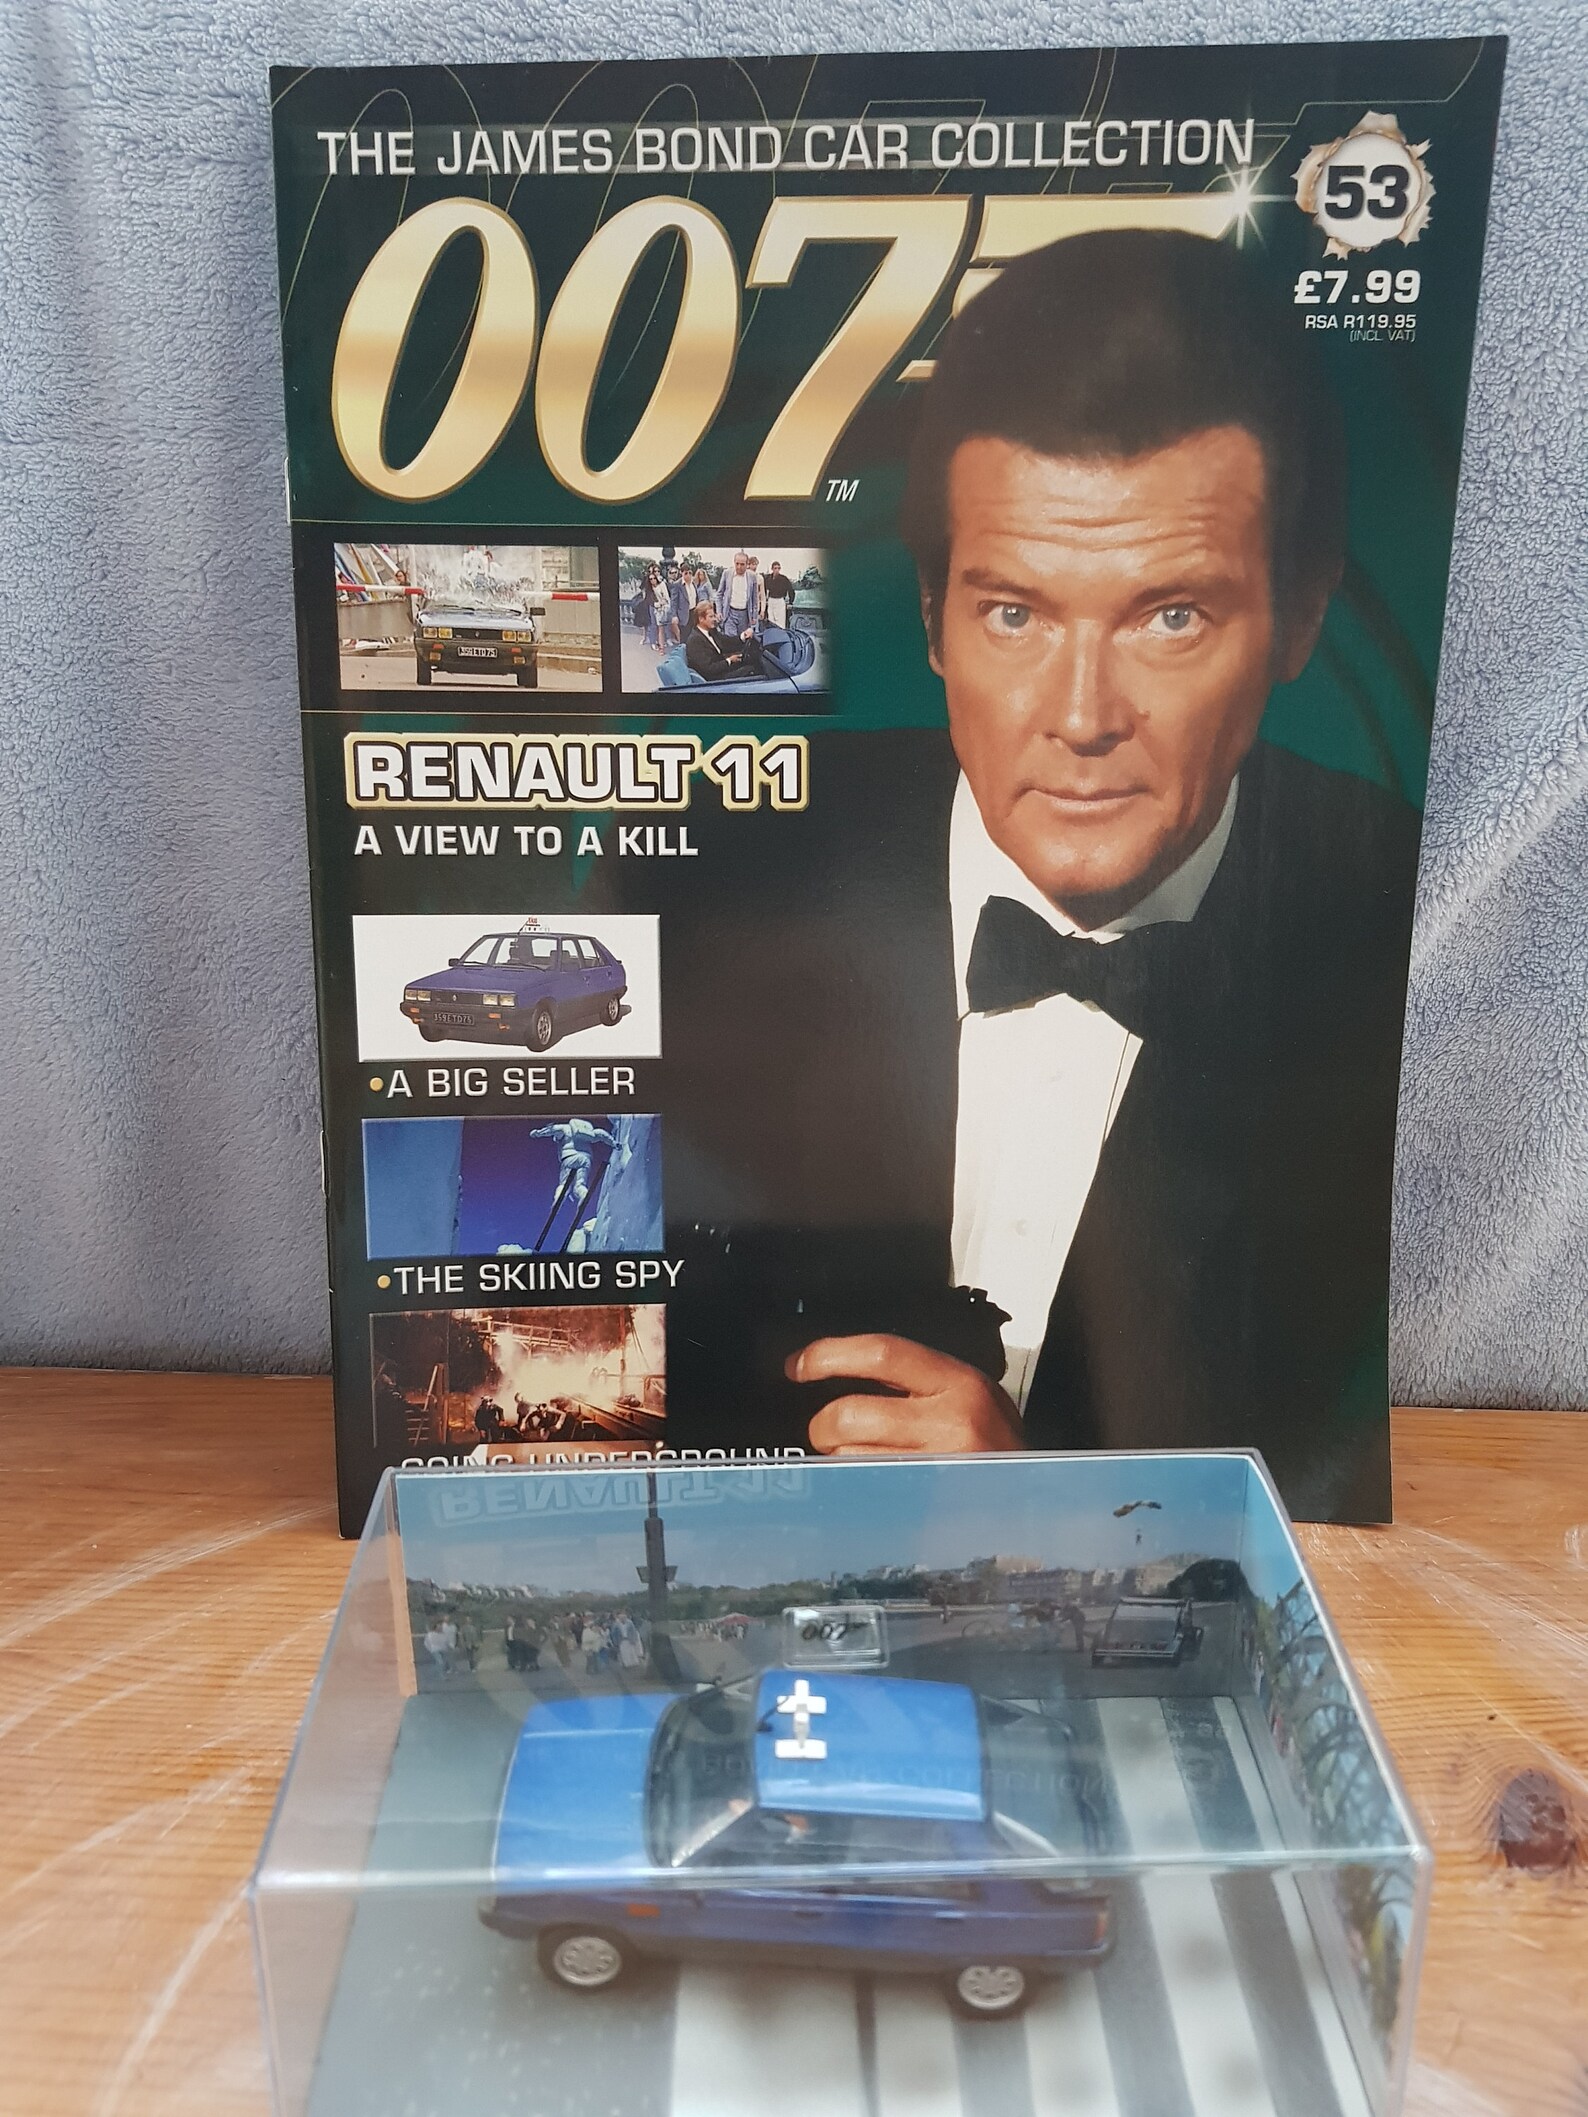 James Bond cars James Bond collection 007 Collectables | Etsy